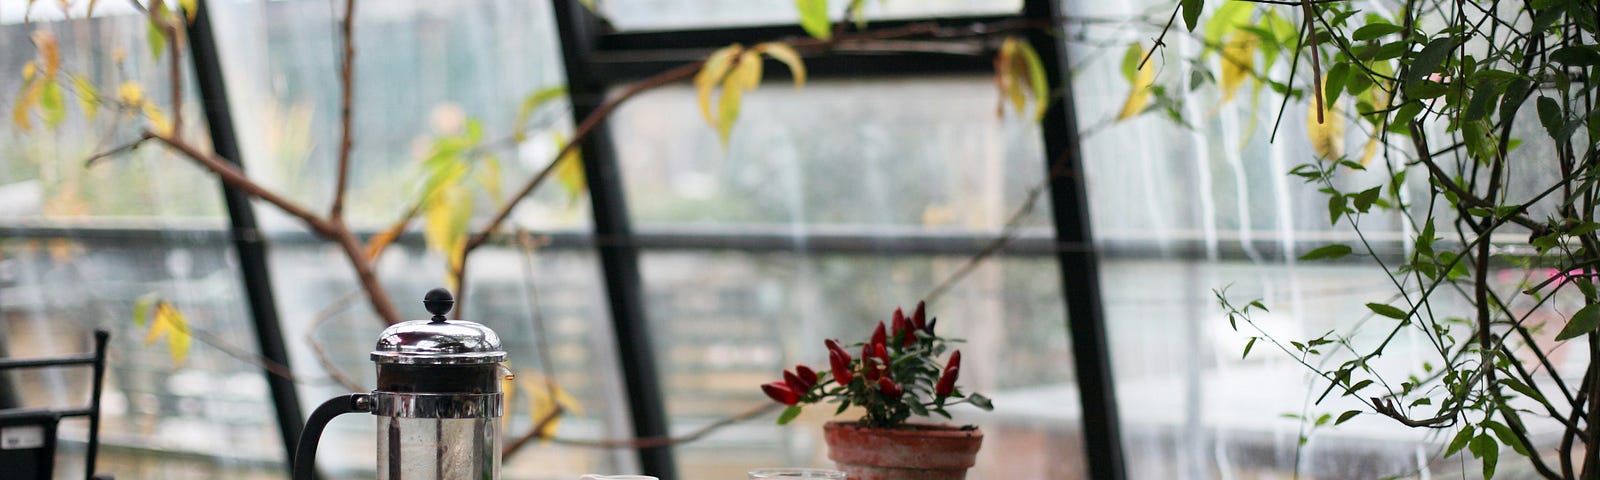 A home style cafe table by a window surrounded by plants.